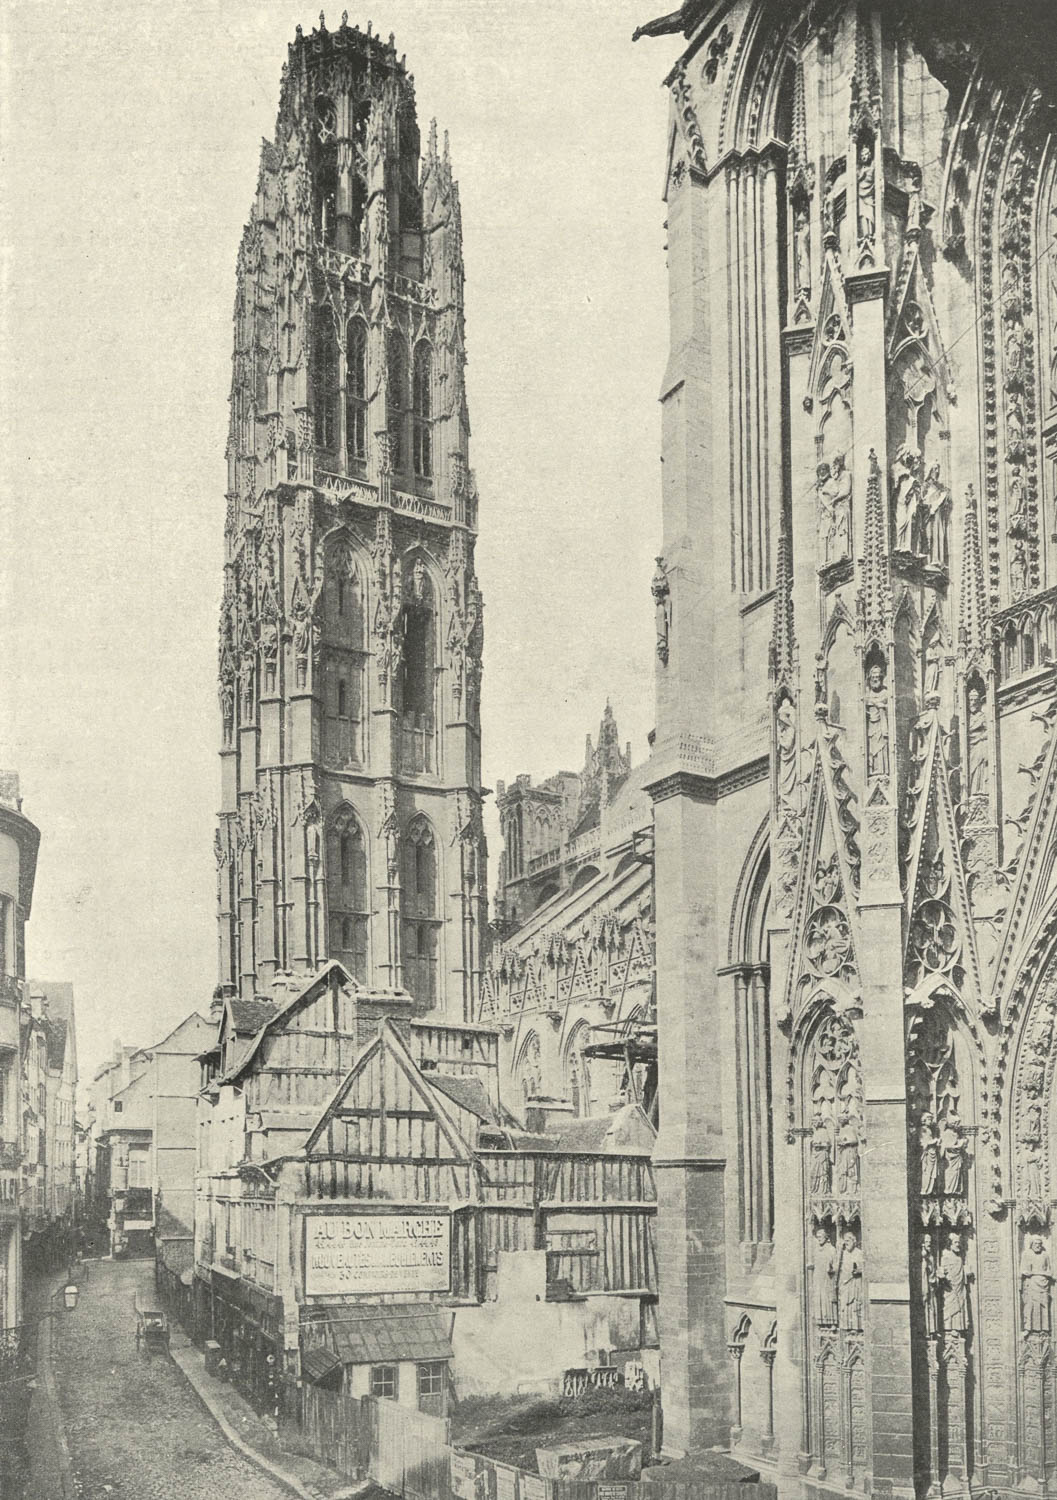 The focus of the black and white photograph is a tall stone cathedral tower set against a clear sky. The tower is roughly square, with four faces. It is covered in sculpture, tracery, and pointed arches. The uppermost portion of the tower is small and octagonal and supported by flying buttresses. In the foreground are low, timber-frame houses and shops built against the wall of the cathedral.